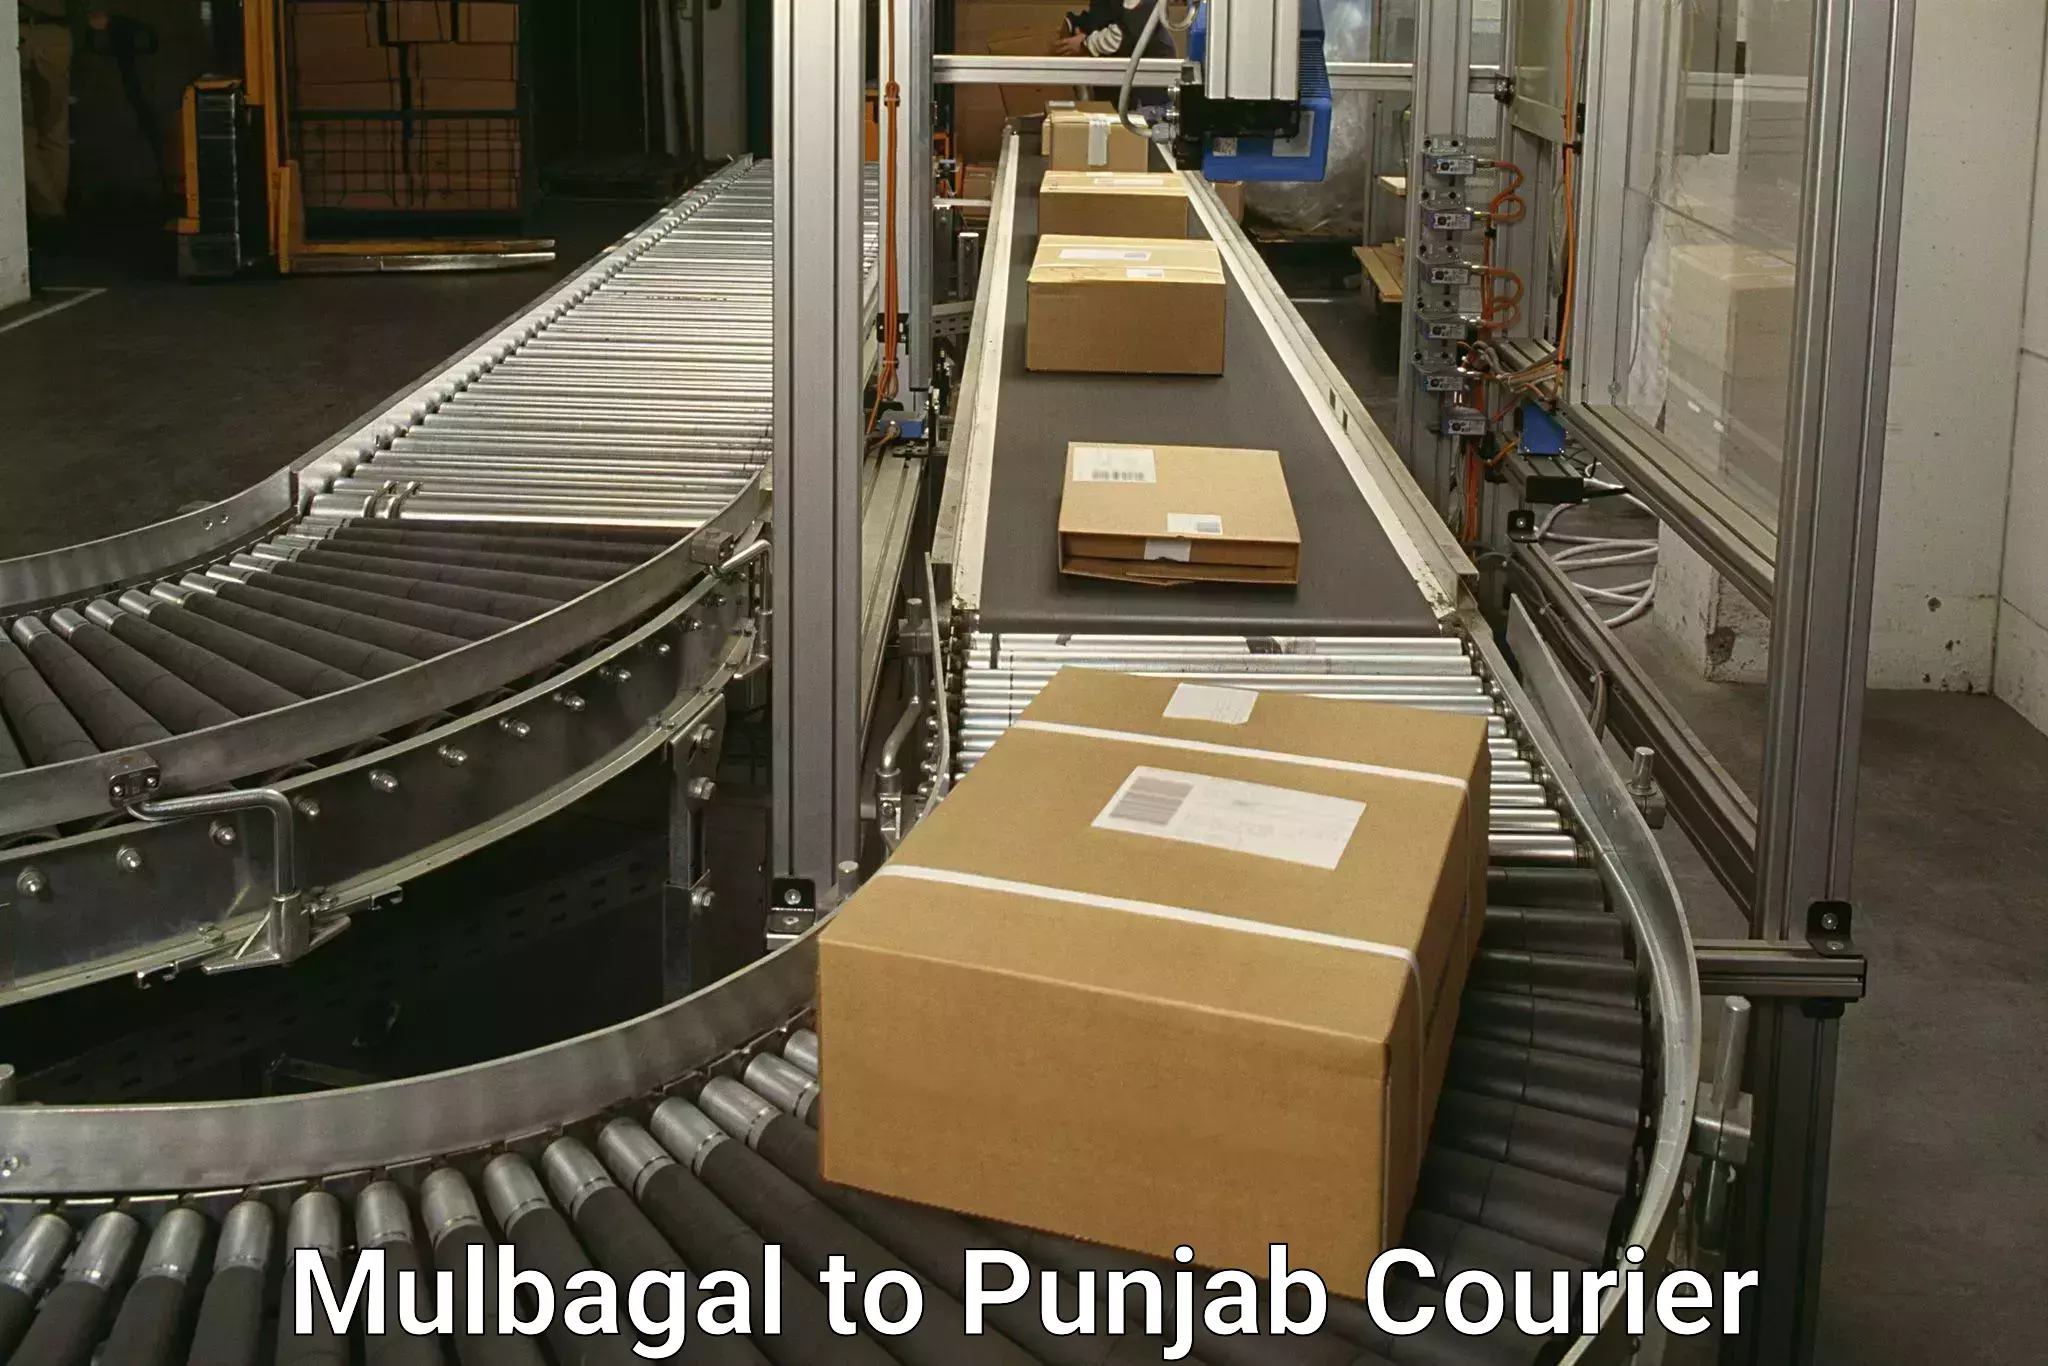 Next-day delivery options Mulbagal to Nakodar